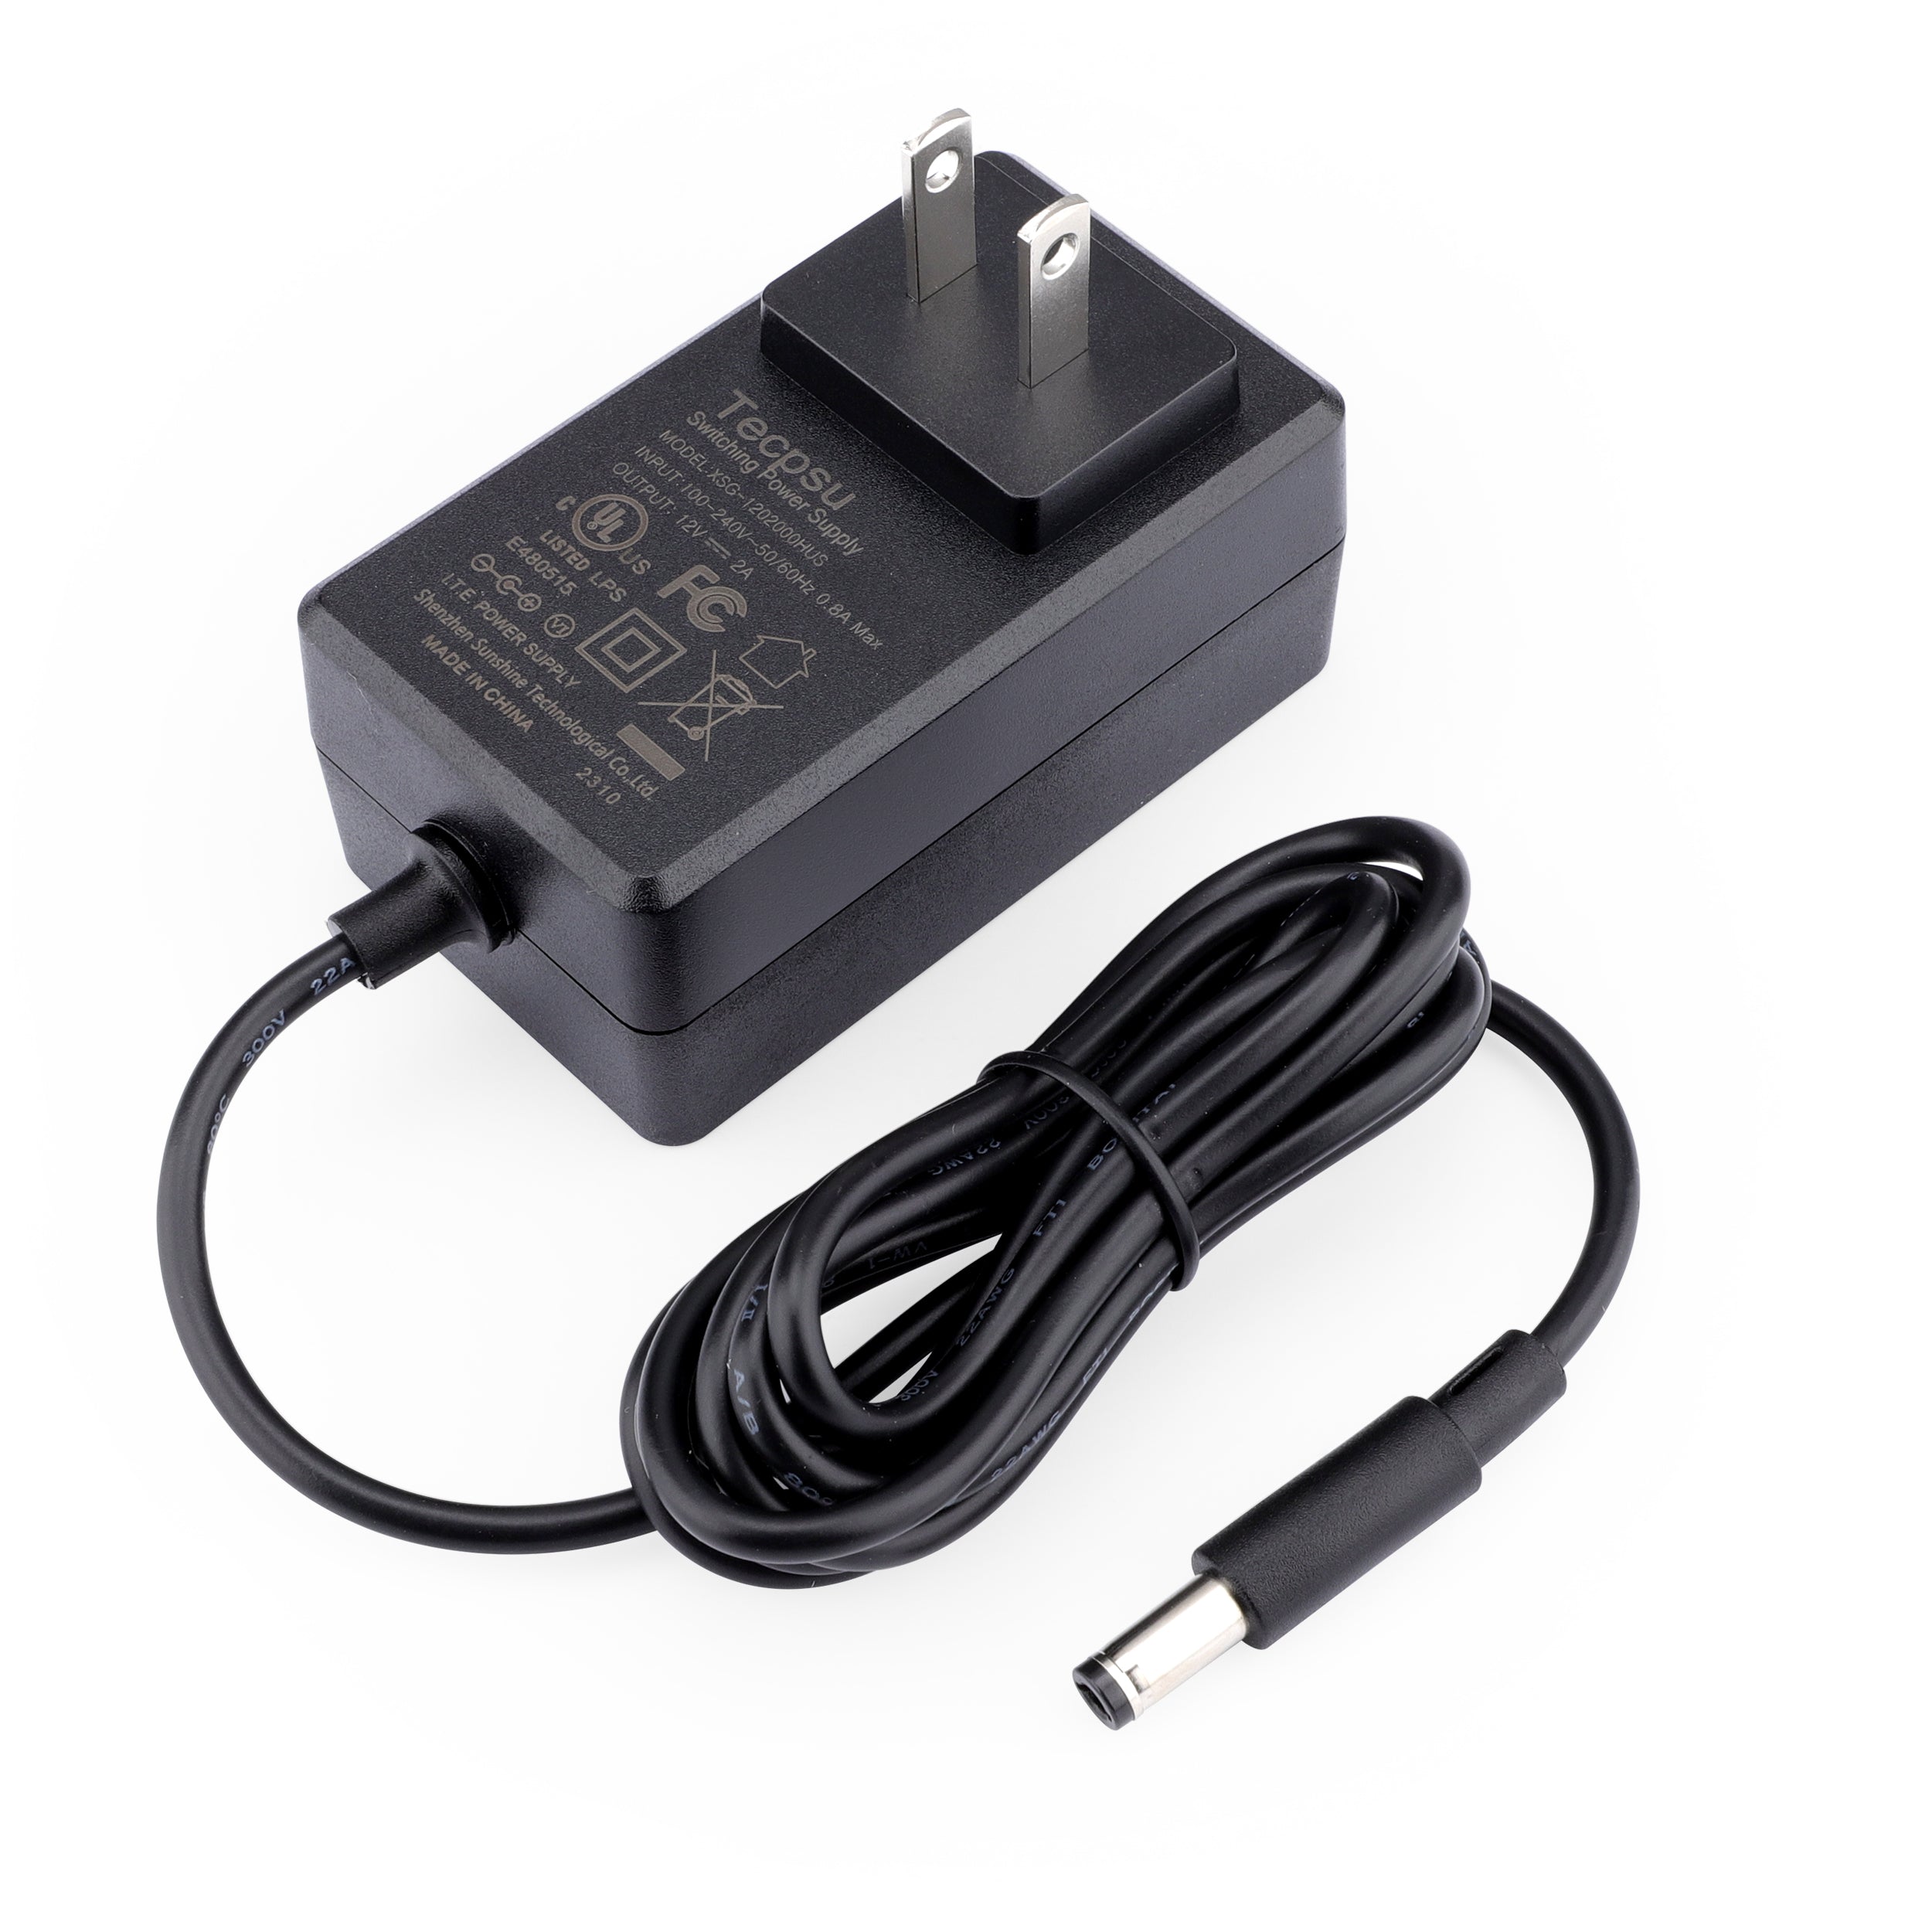 Tecpsu Brand New 12V 2A 5.5x2.5mm Center Positive AC-DC Adapter Charger Power Supply